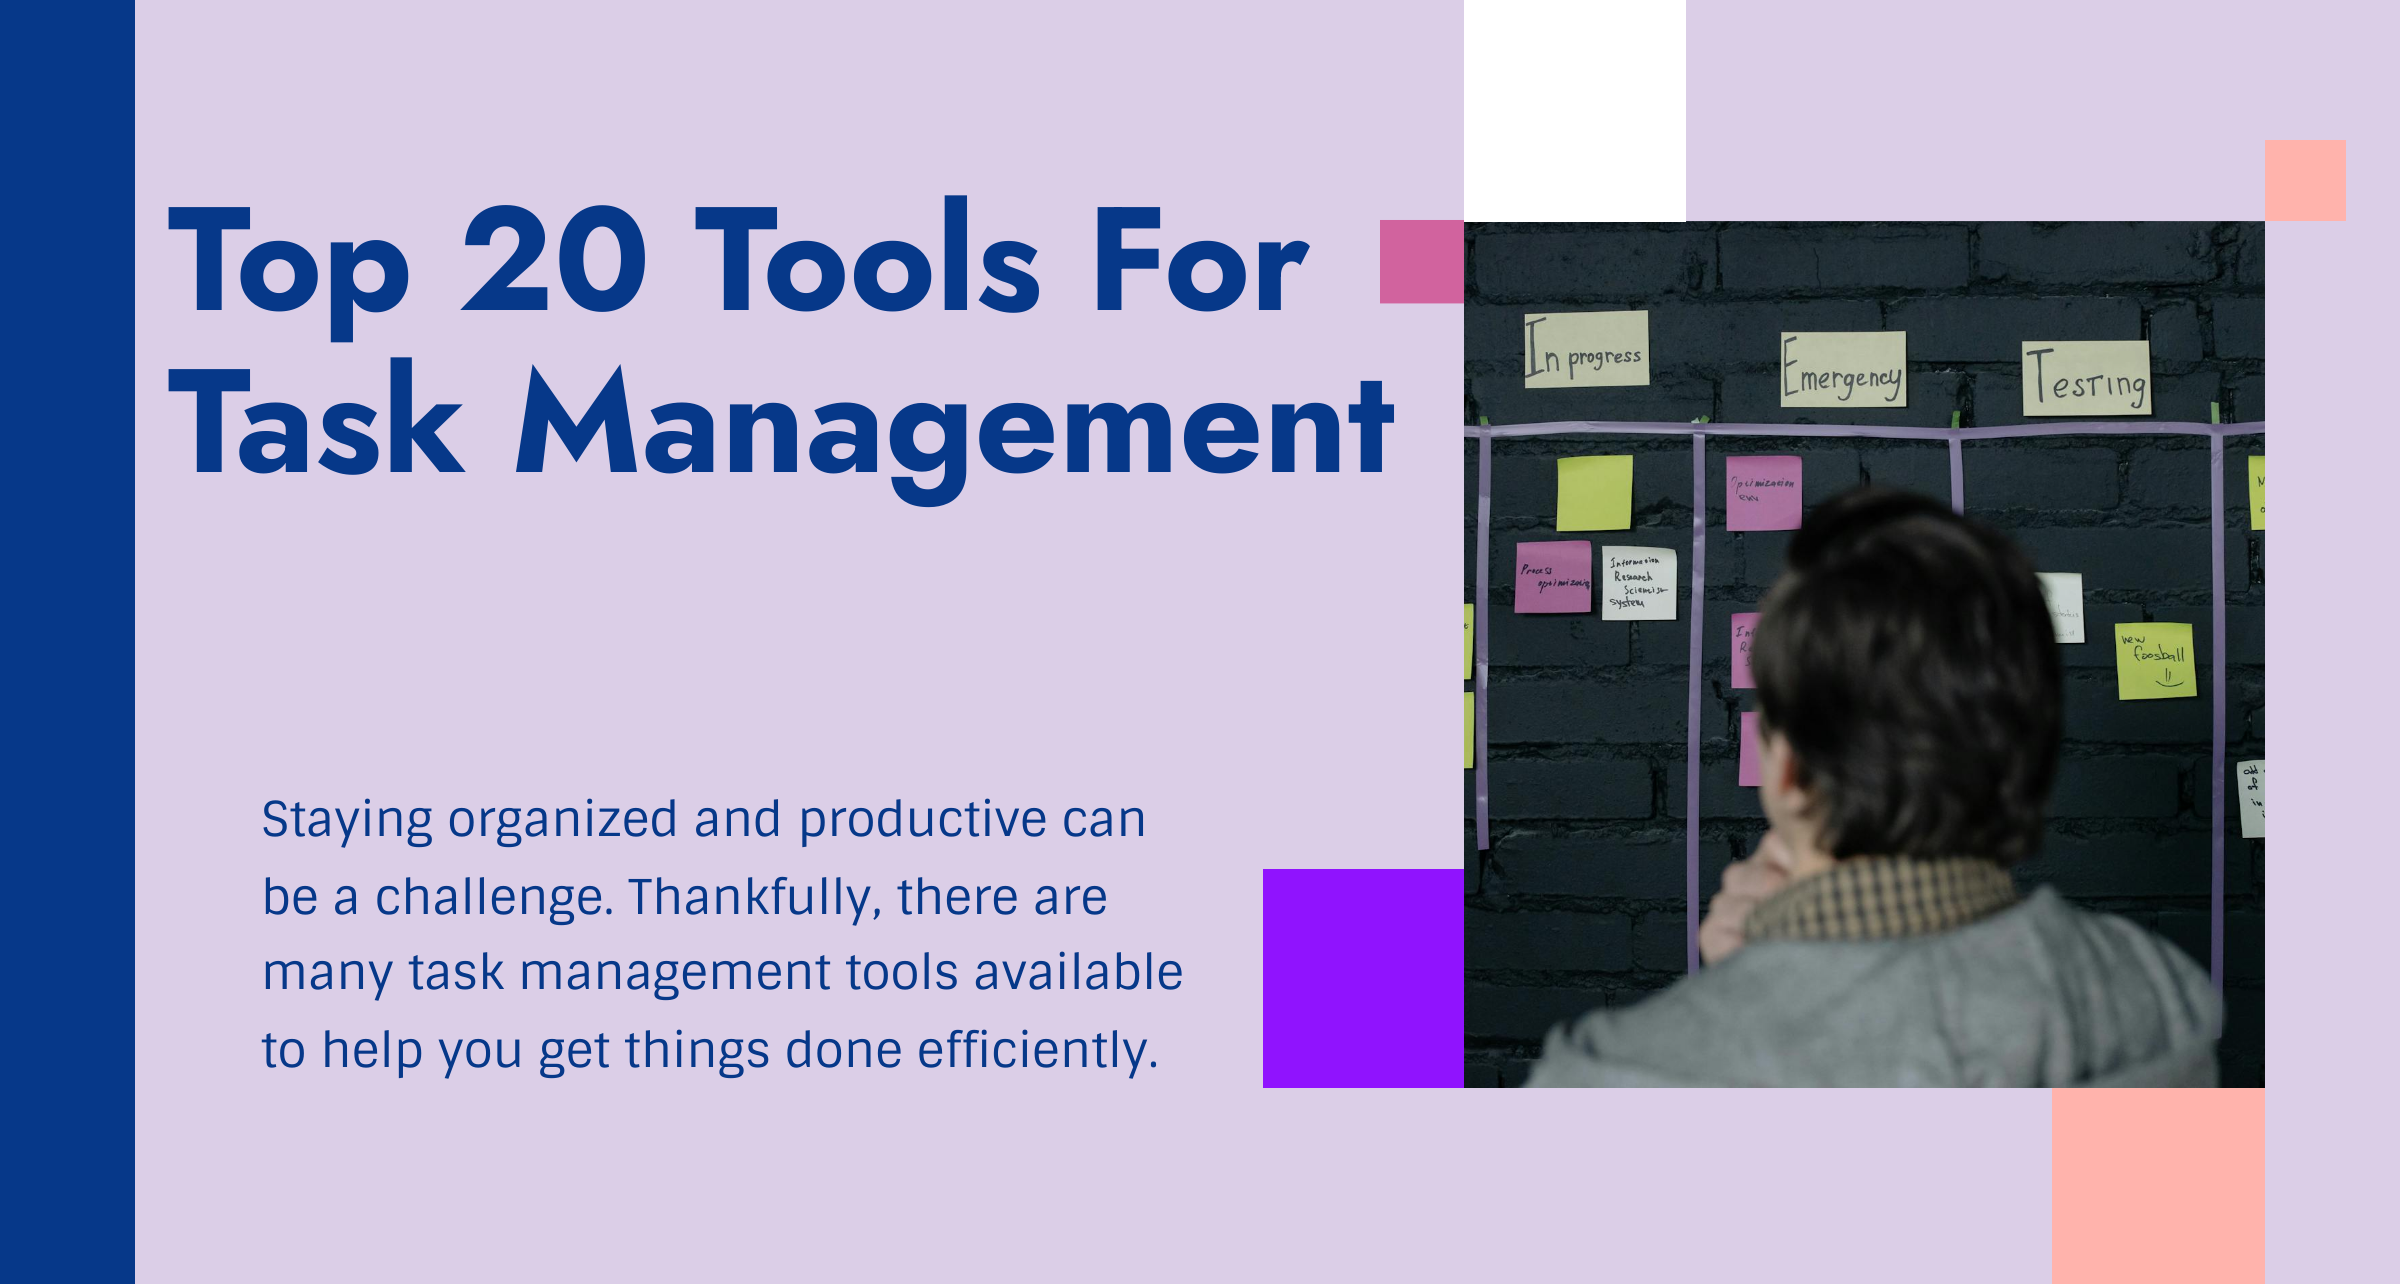 Top 20 Tools for Task Management